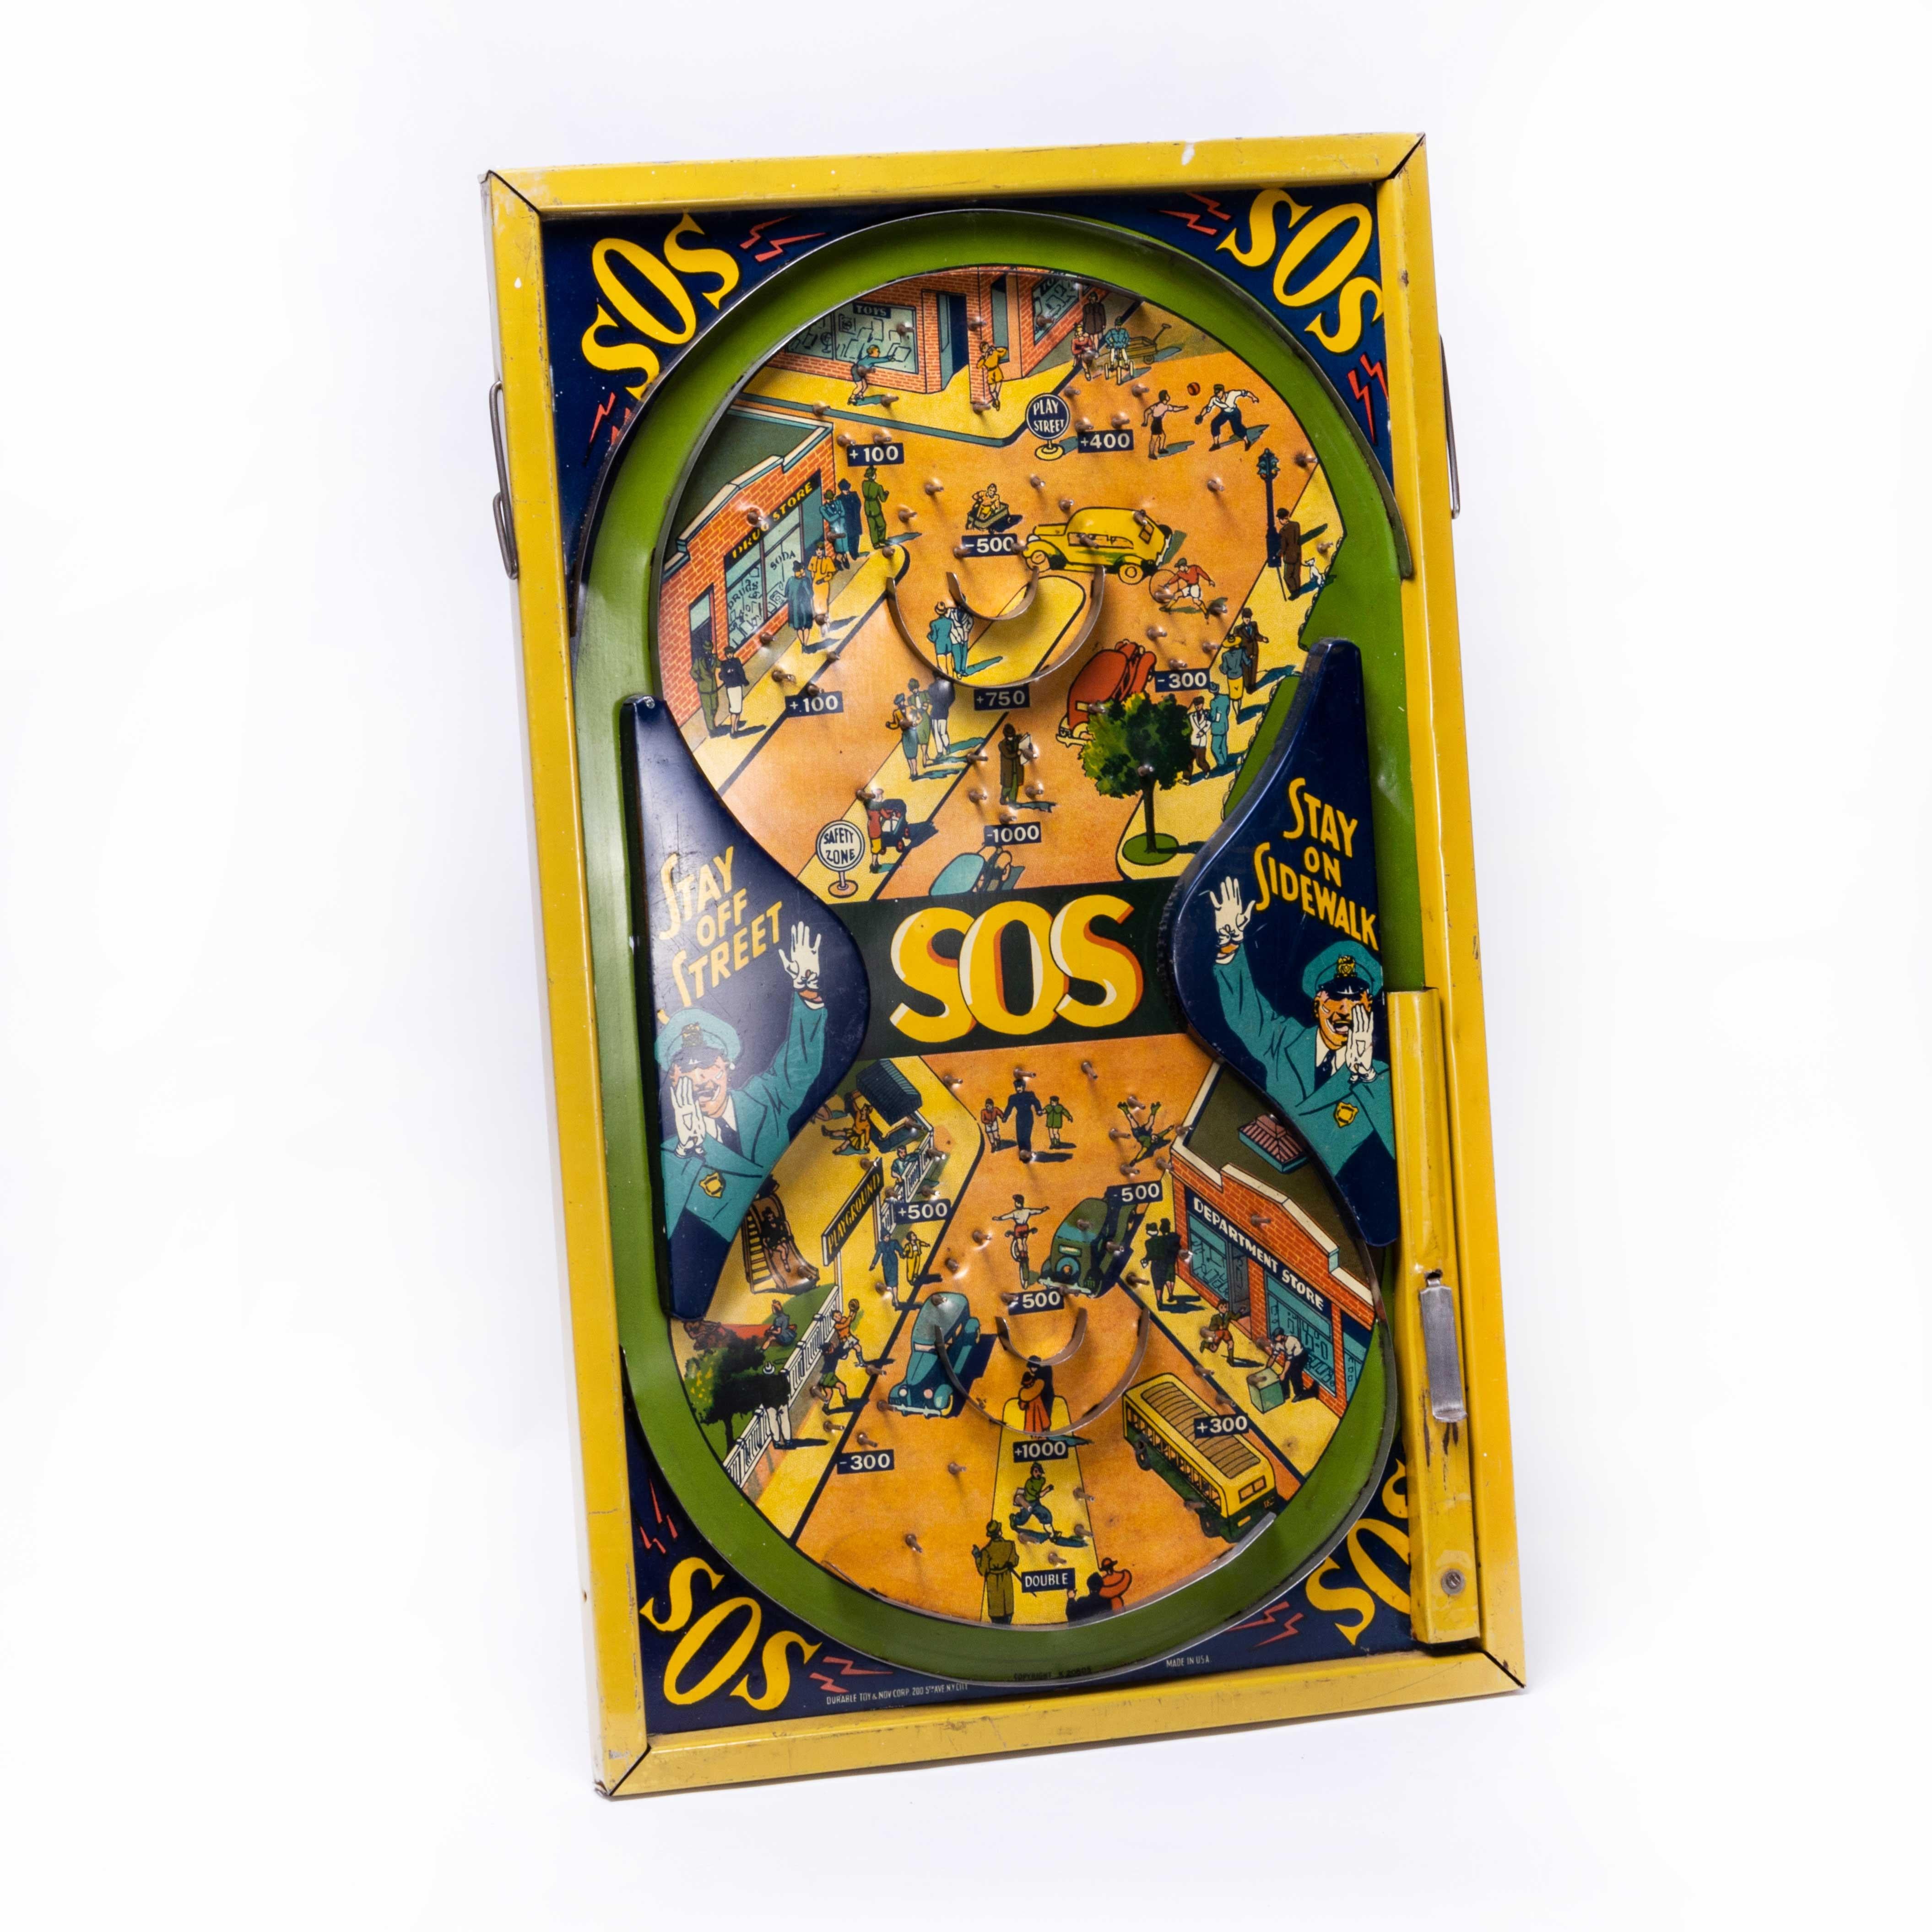 Rare American mid-century SOS Pinball Game – Bagatelle
Rare American mid-century SOS Pinball Game – Bagatelle. Pinball game still in full working order. Made in America. Sold as a decorative item but in reasonable working order for a very old